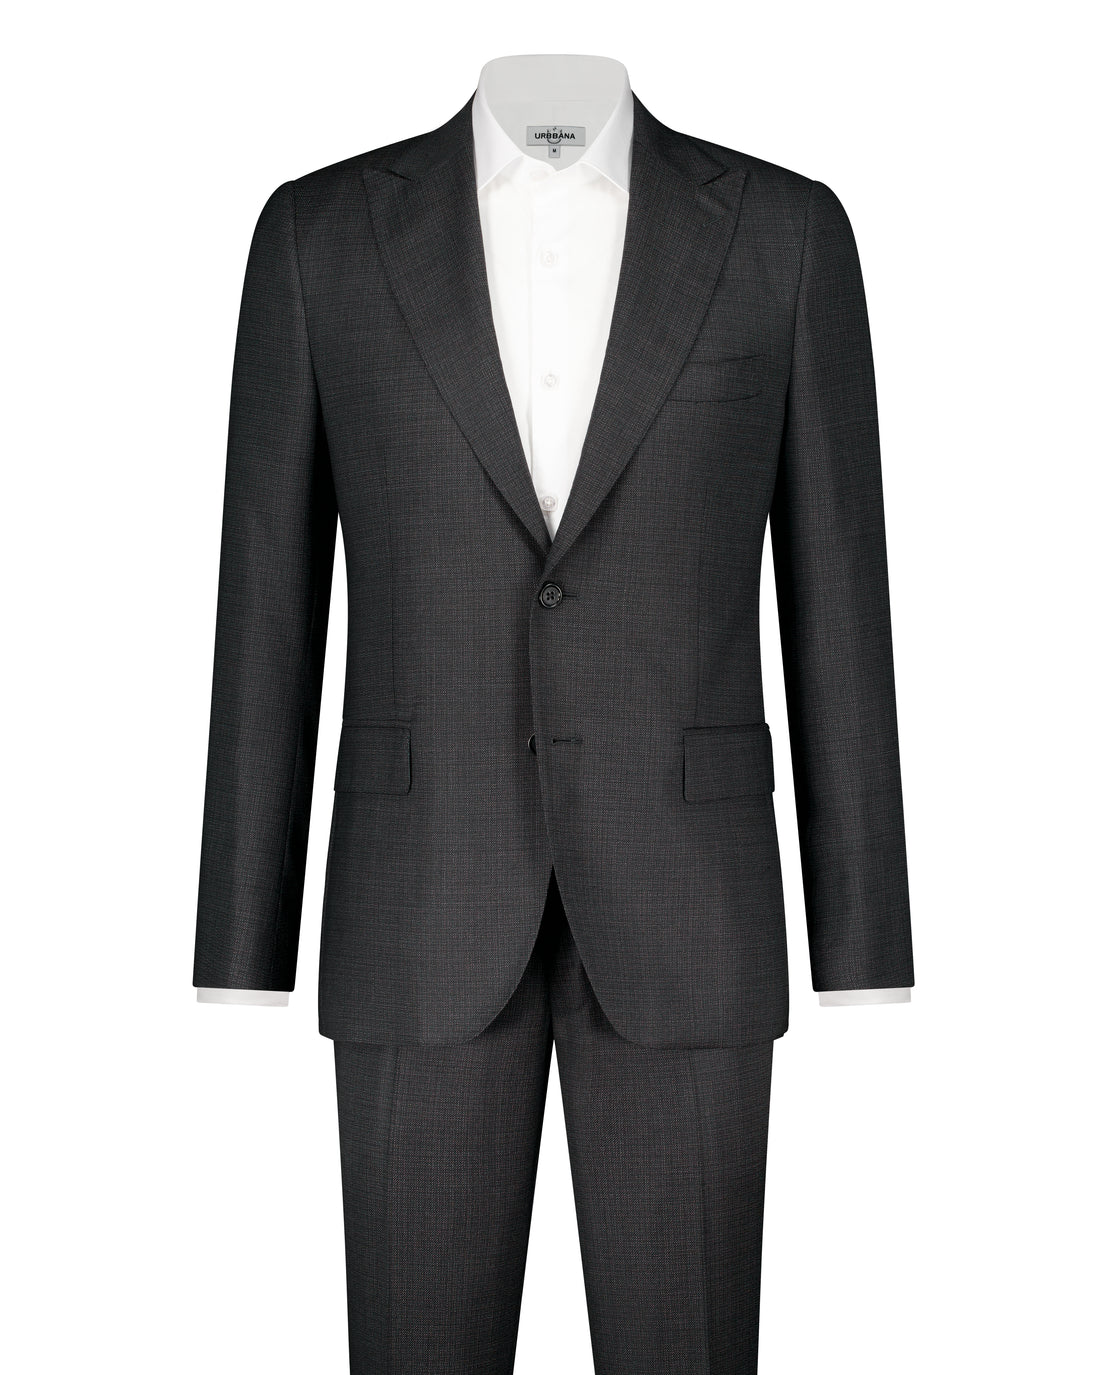 Marco Zegna Cloth Suit - Dark Charcoal - Made in Italy